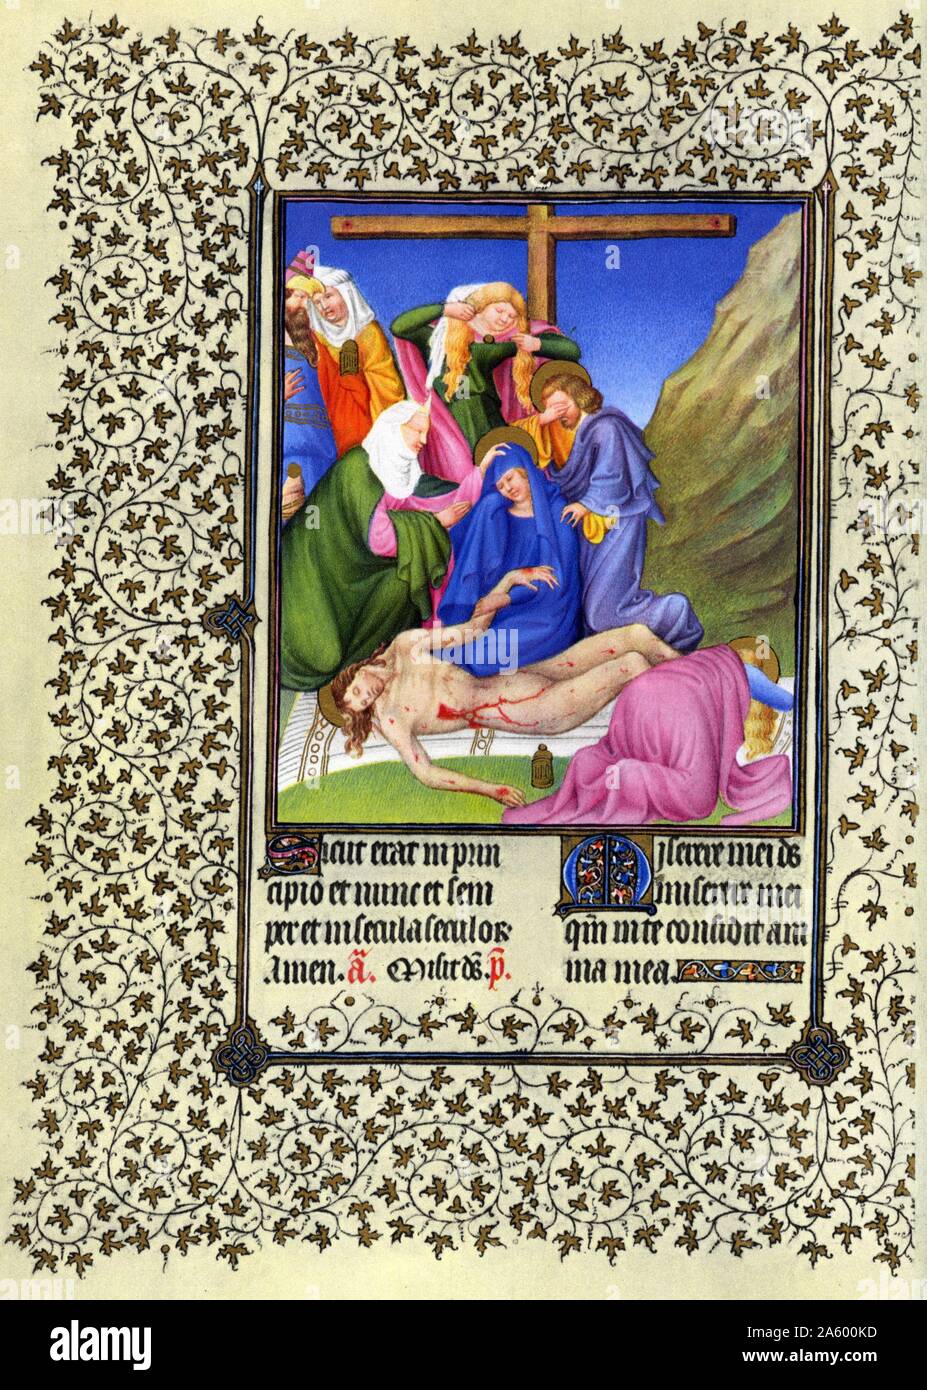 Illumination depicting the Lamentation from the Belles Heures of Jean de France, Duc de Berry (The Beautiful Hours) an early 15th-century illuminated manuscript book of hours. Dated 15th Century Stock Photo